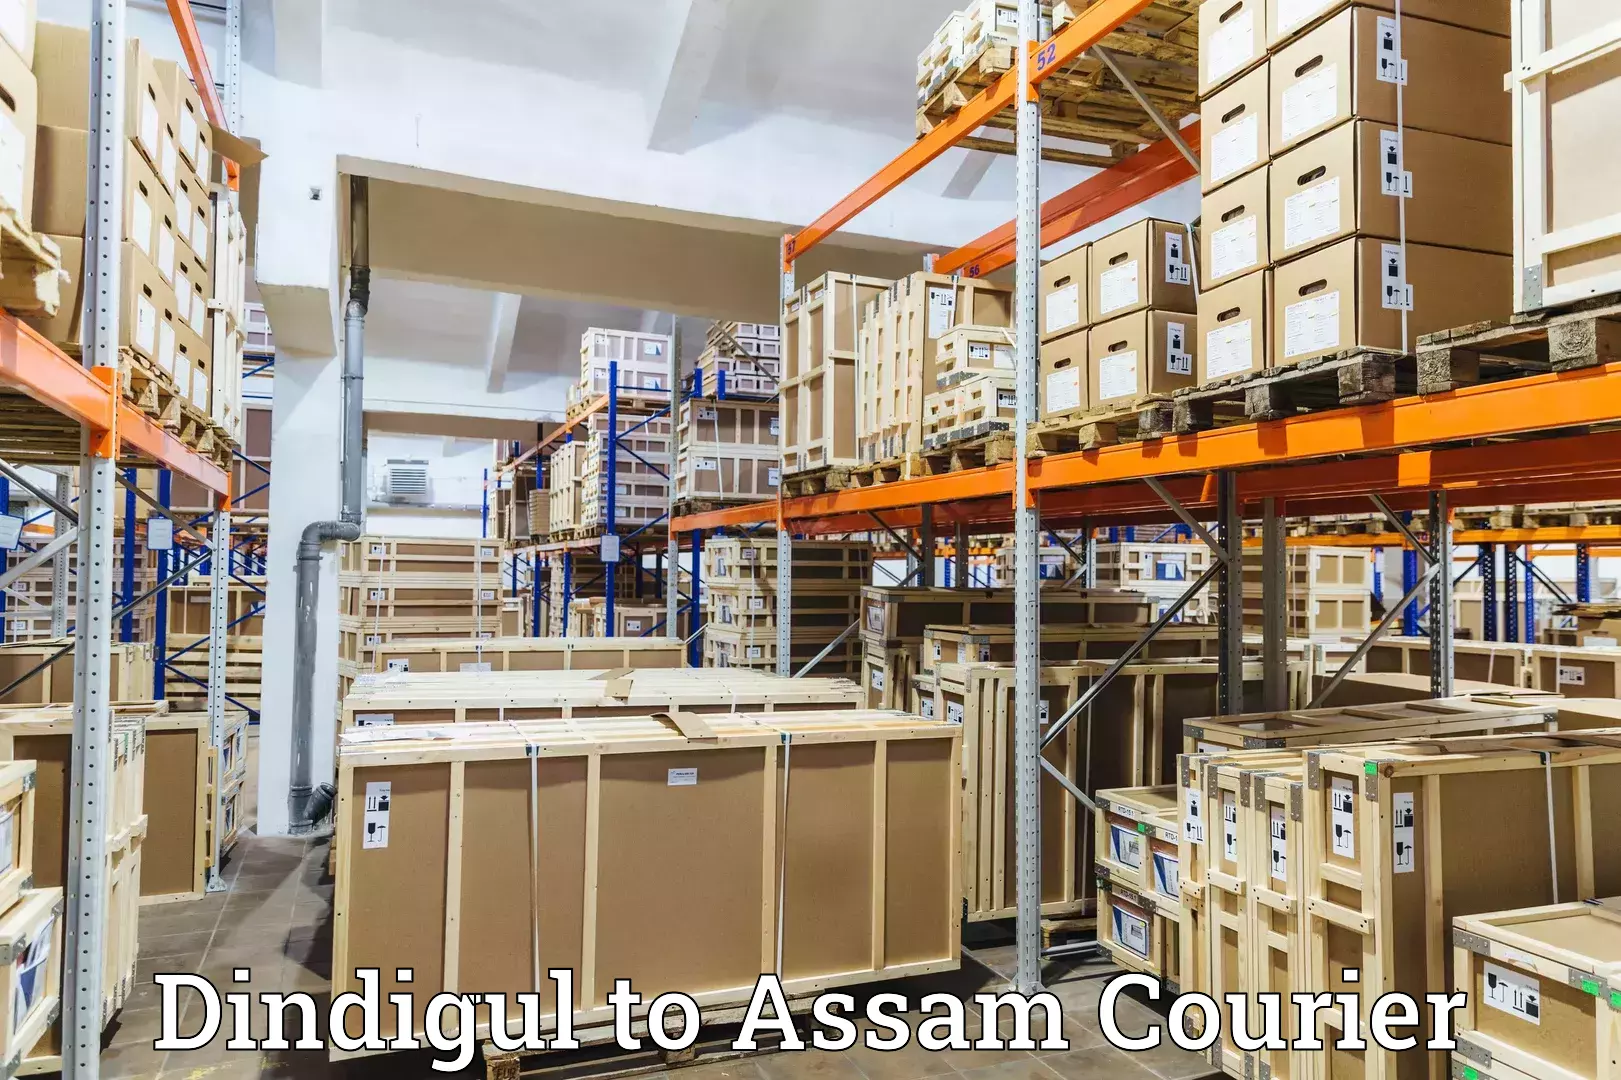 Comprehensive shipping network Dindigul to Sonitpur